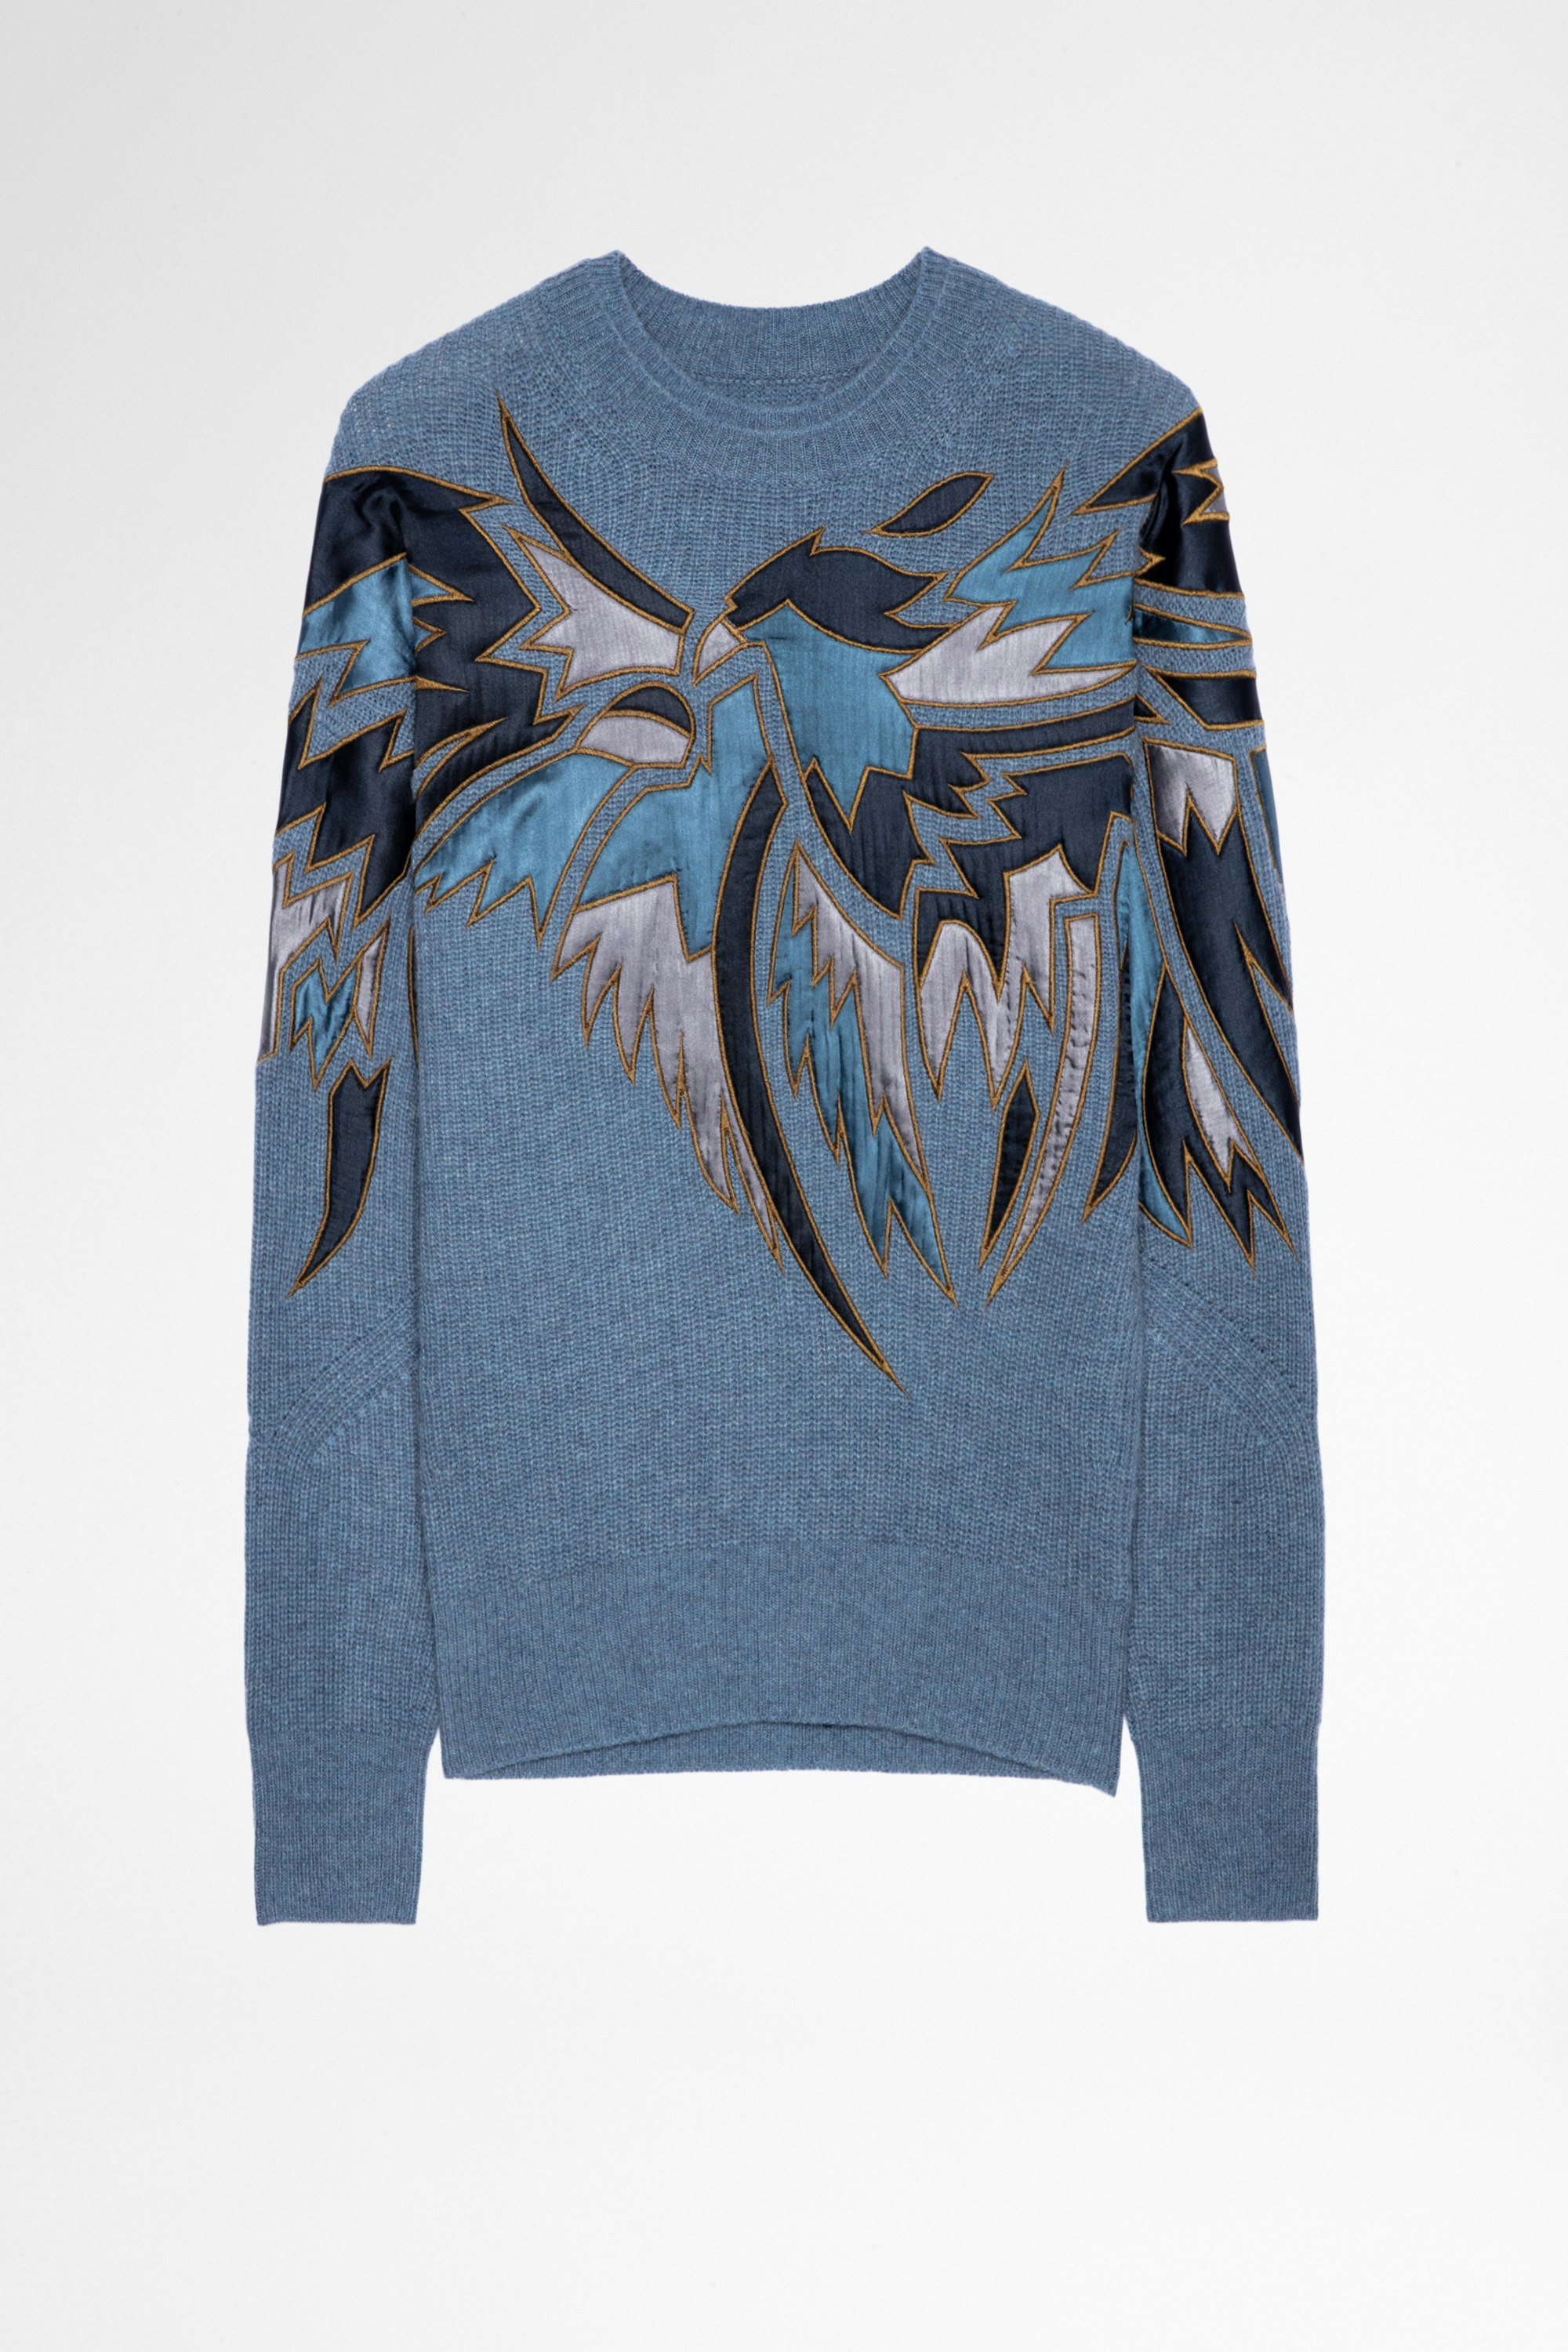 Kanson Jumper Cashmere Women's blue wool and cashmere jumper with eagle print